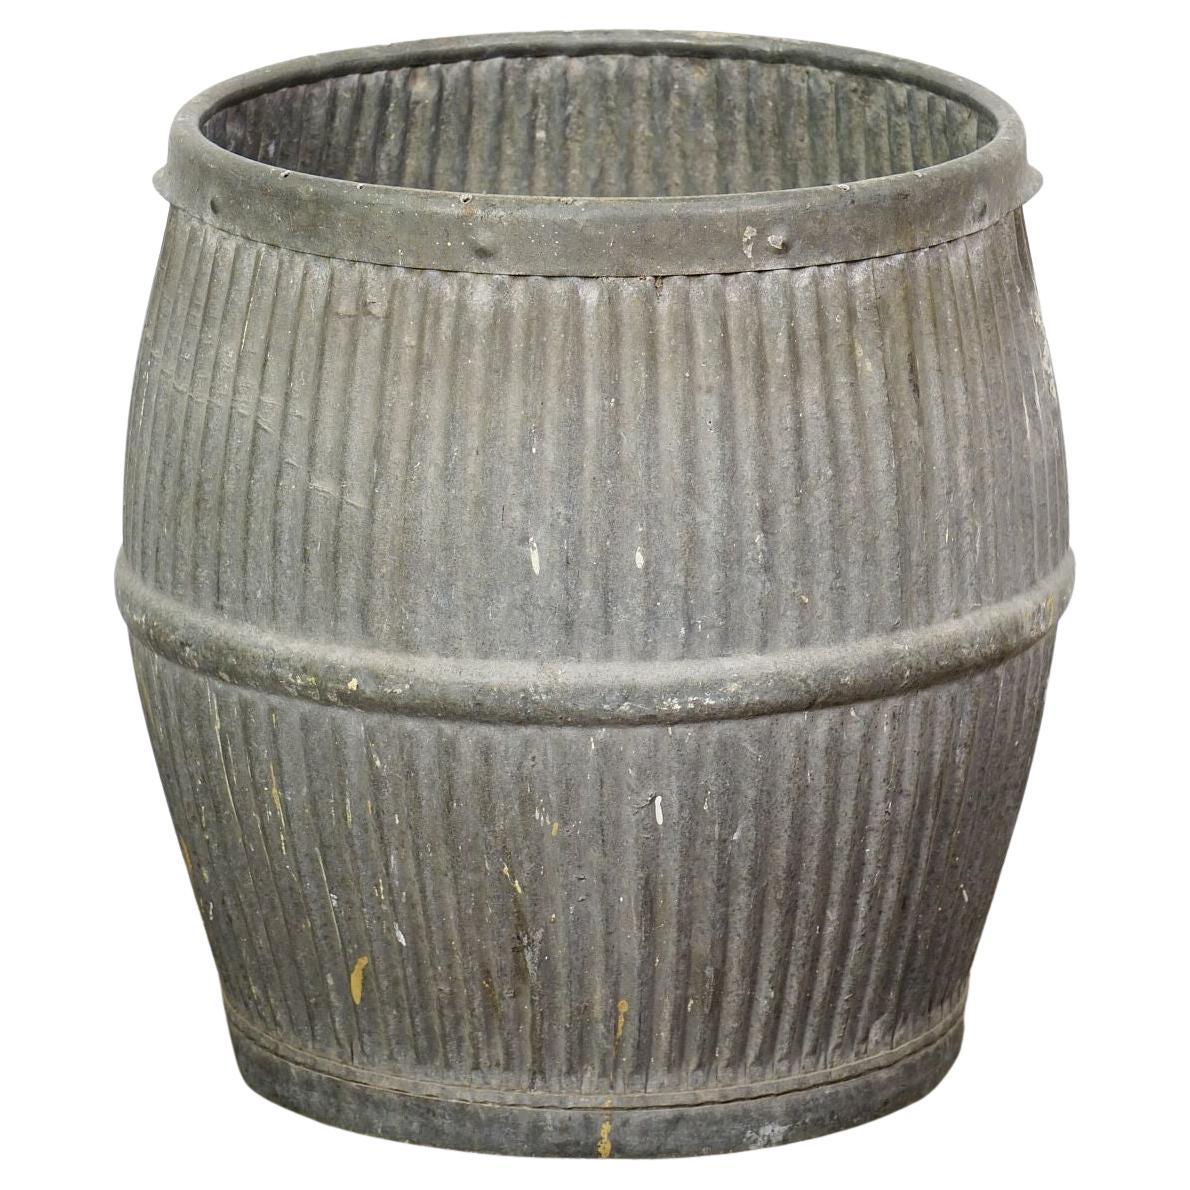 English Garden Pot or Dolly Tub Planter of Zinc For Sale